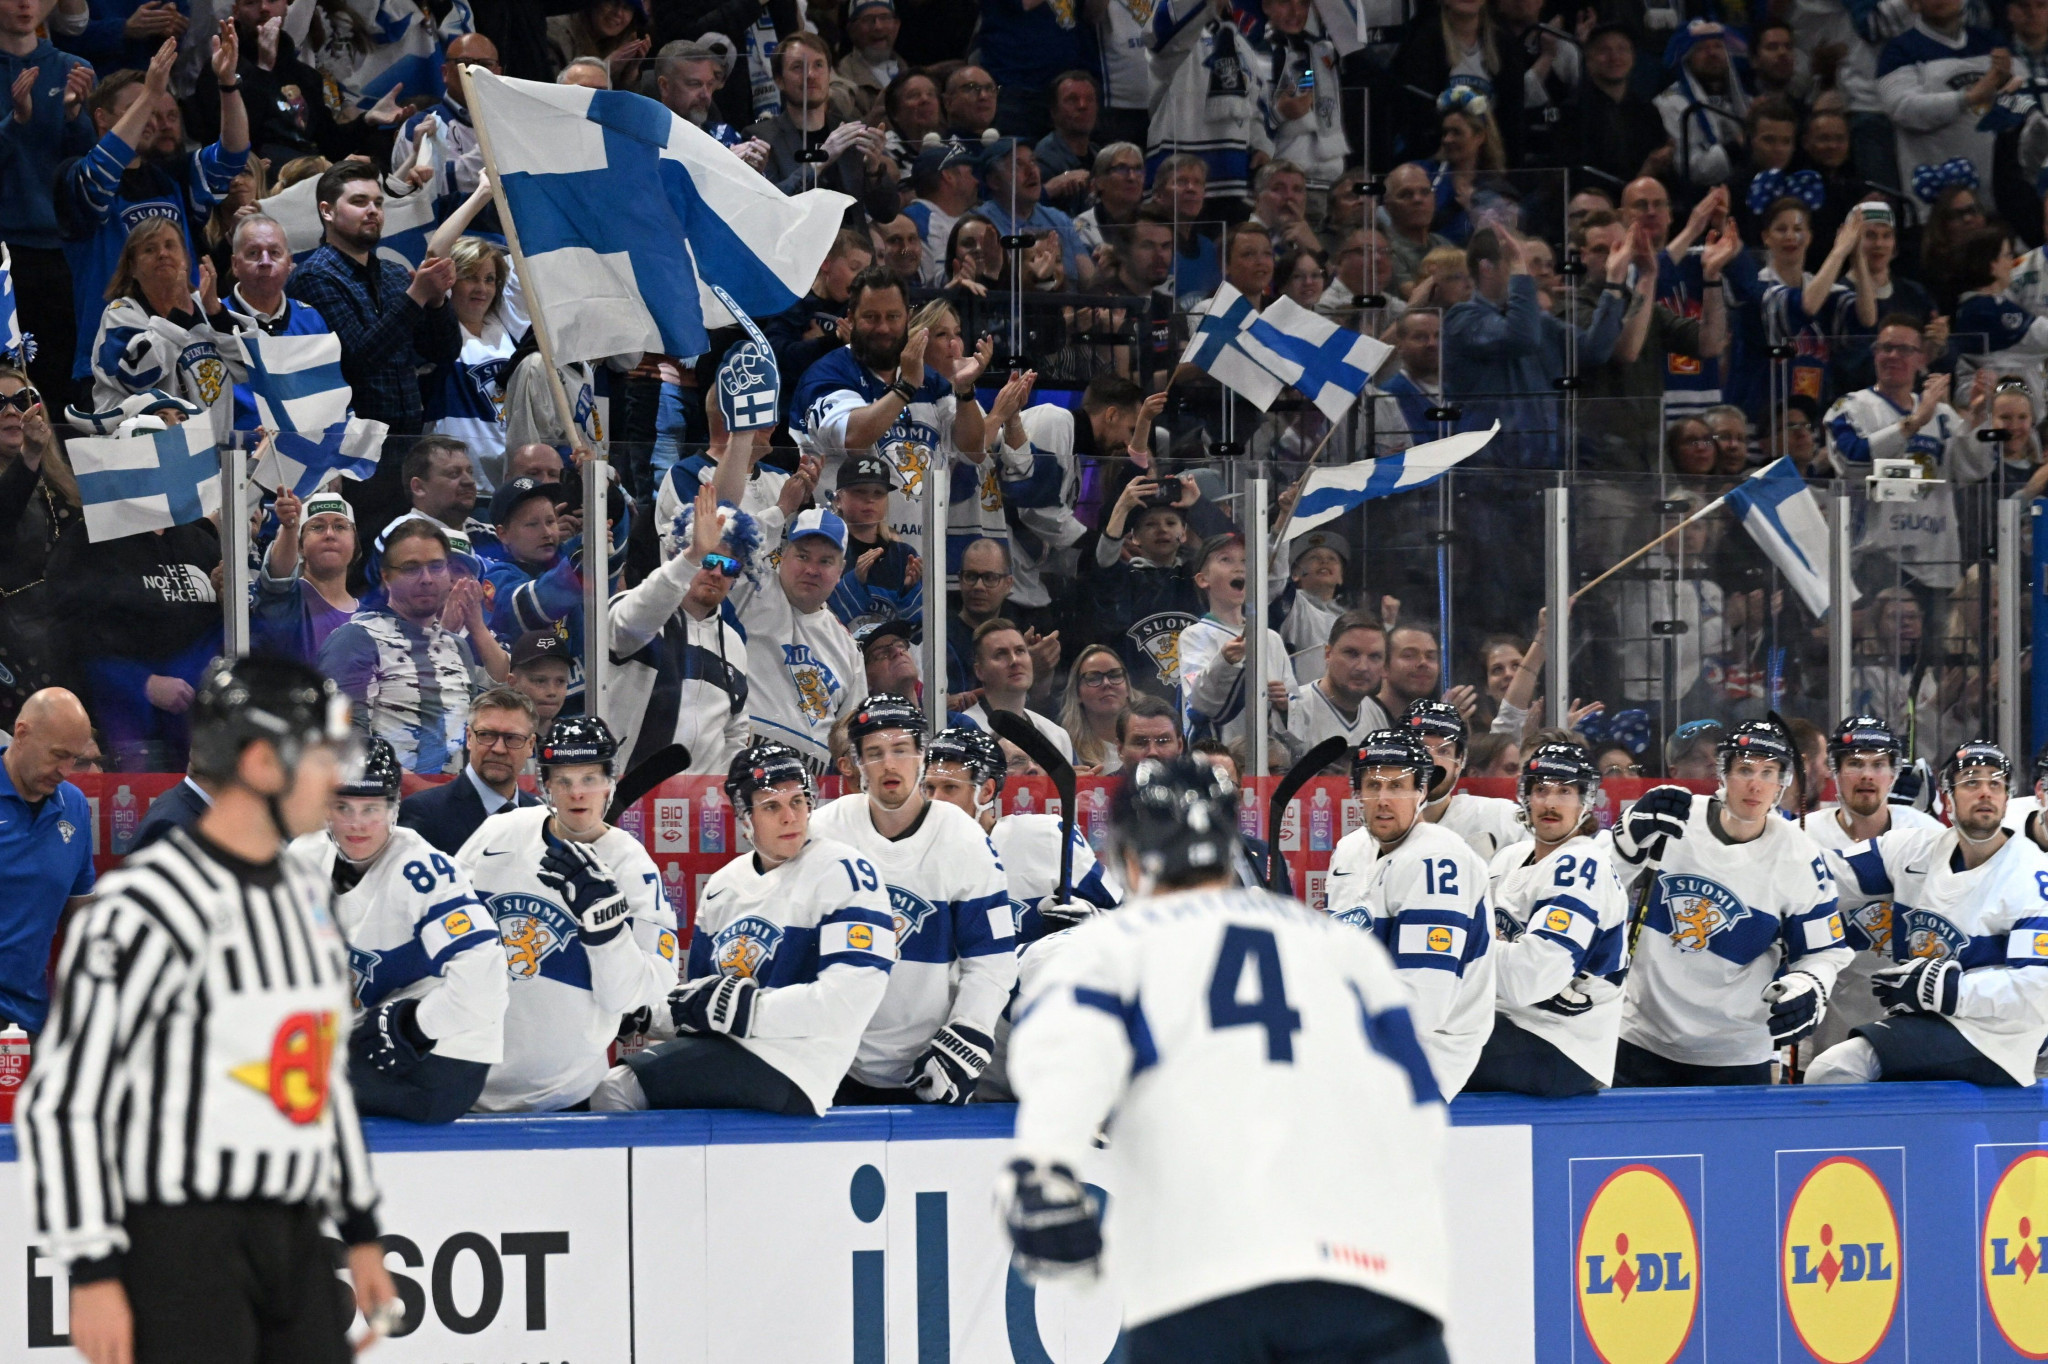 Finnish fans celebrate during their team's 7-1 thrashing of Hungary in Tampere ©Getty Images